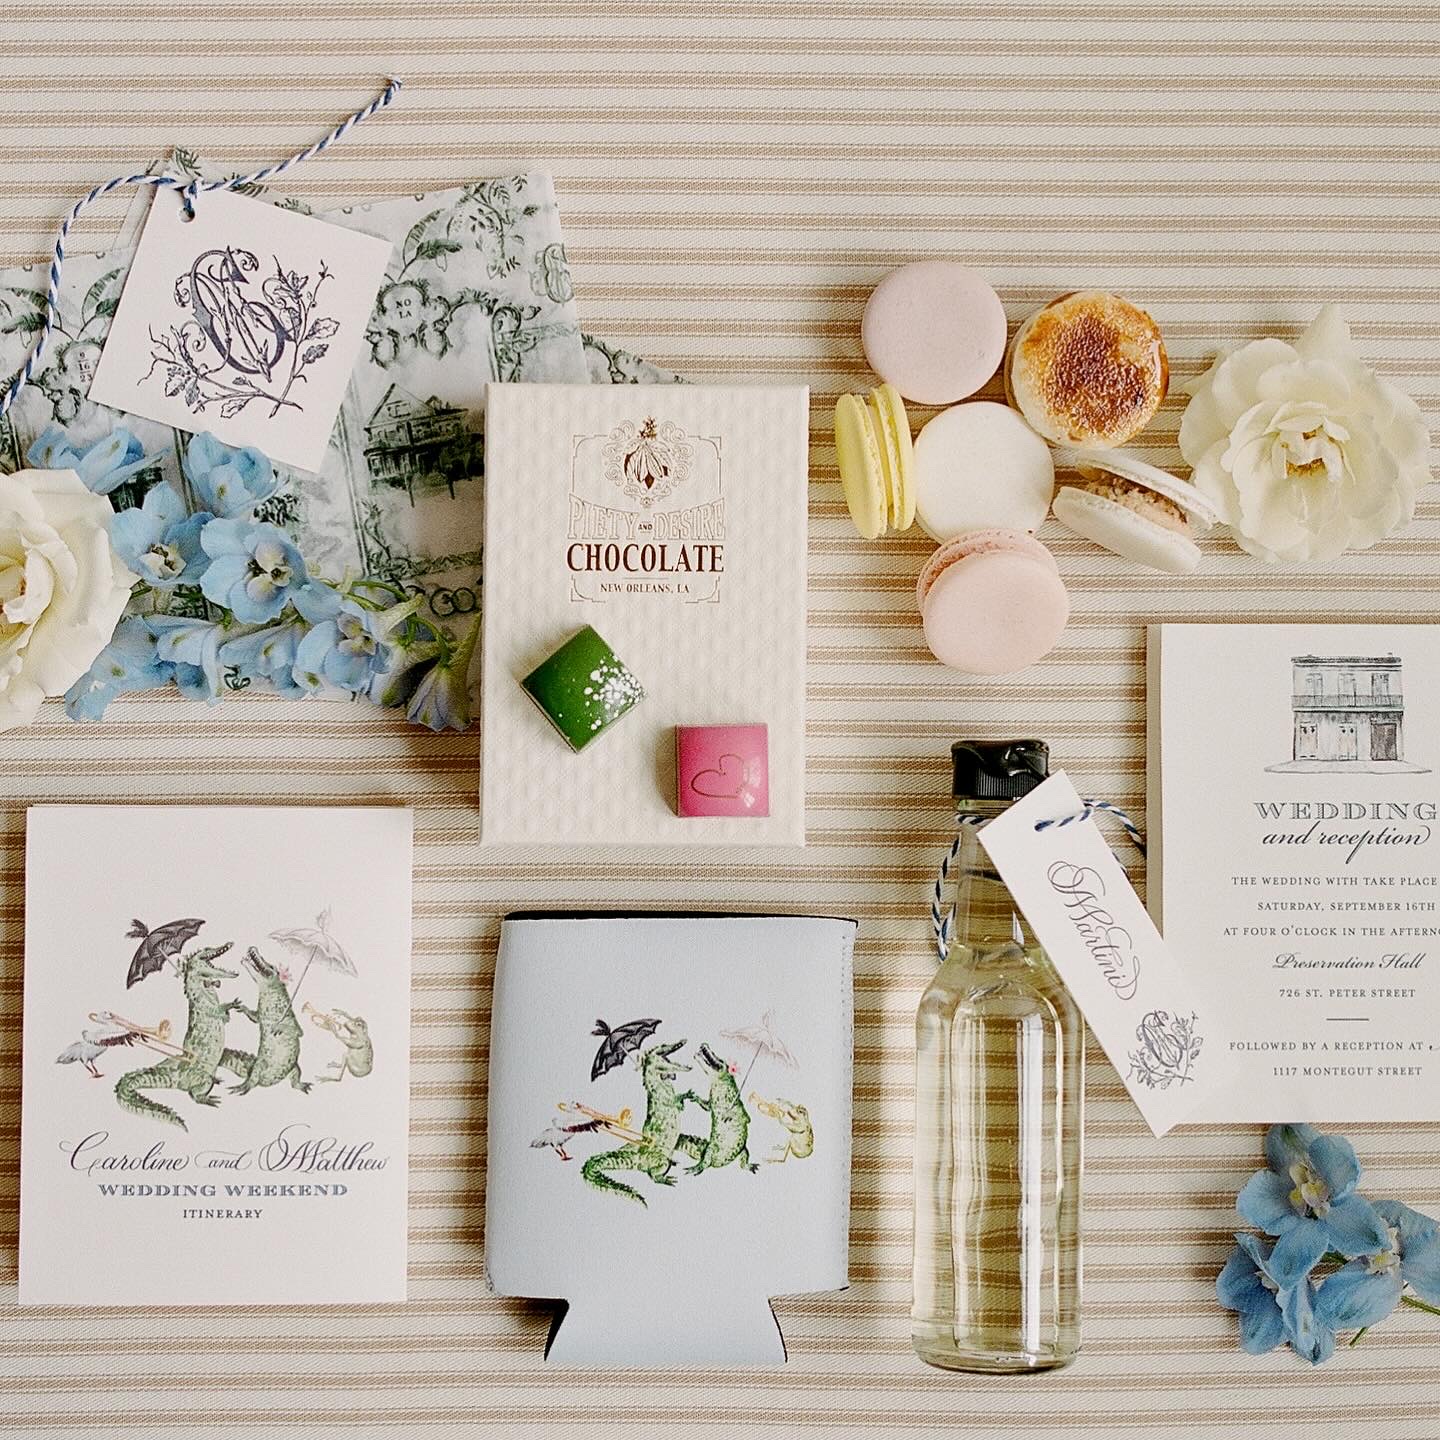 Assorted welcome bag items laid out, including chocolates, macarons, custom-printed materials, and floral decorations.